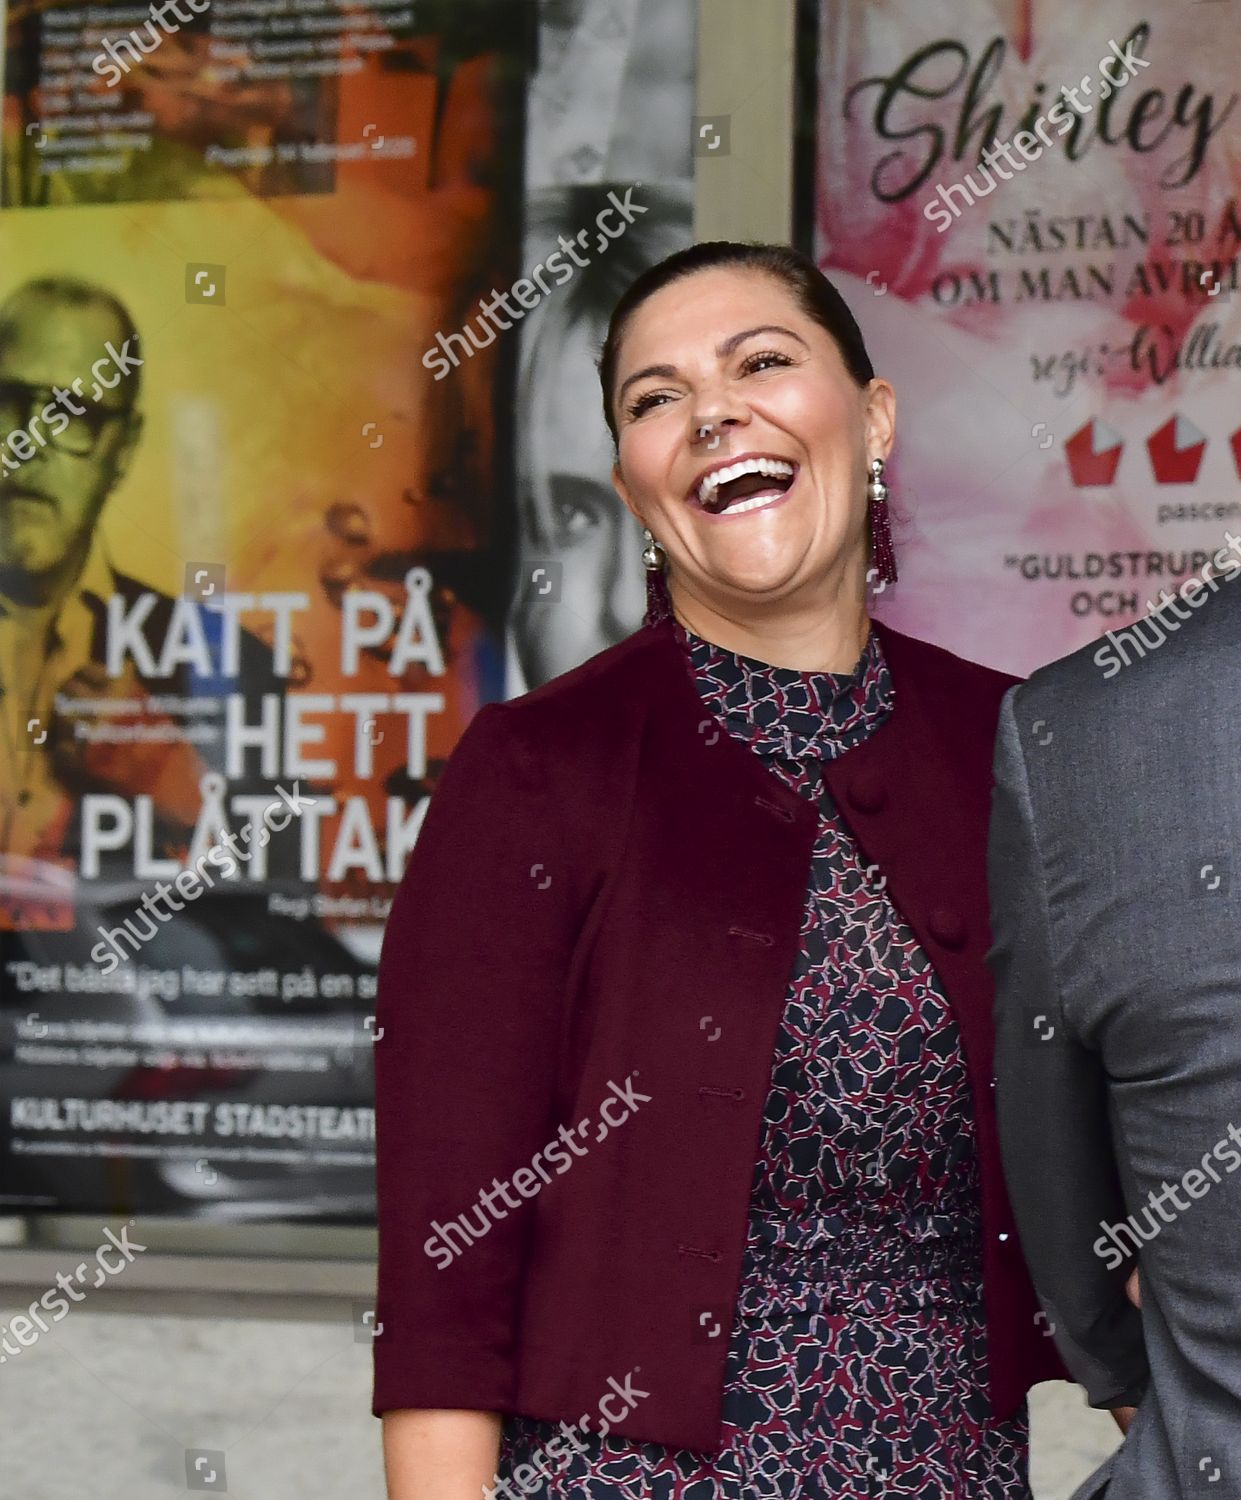 prince-daniel-and-crown-princess-victoria-visit-the-maxim-theater-stockholm-sweden-shutterstock-editorial-10817556b.jpg